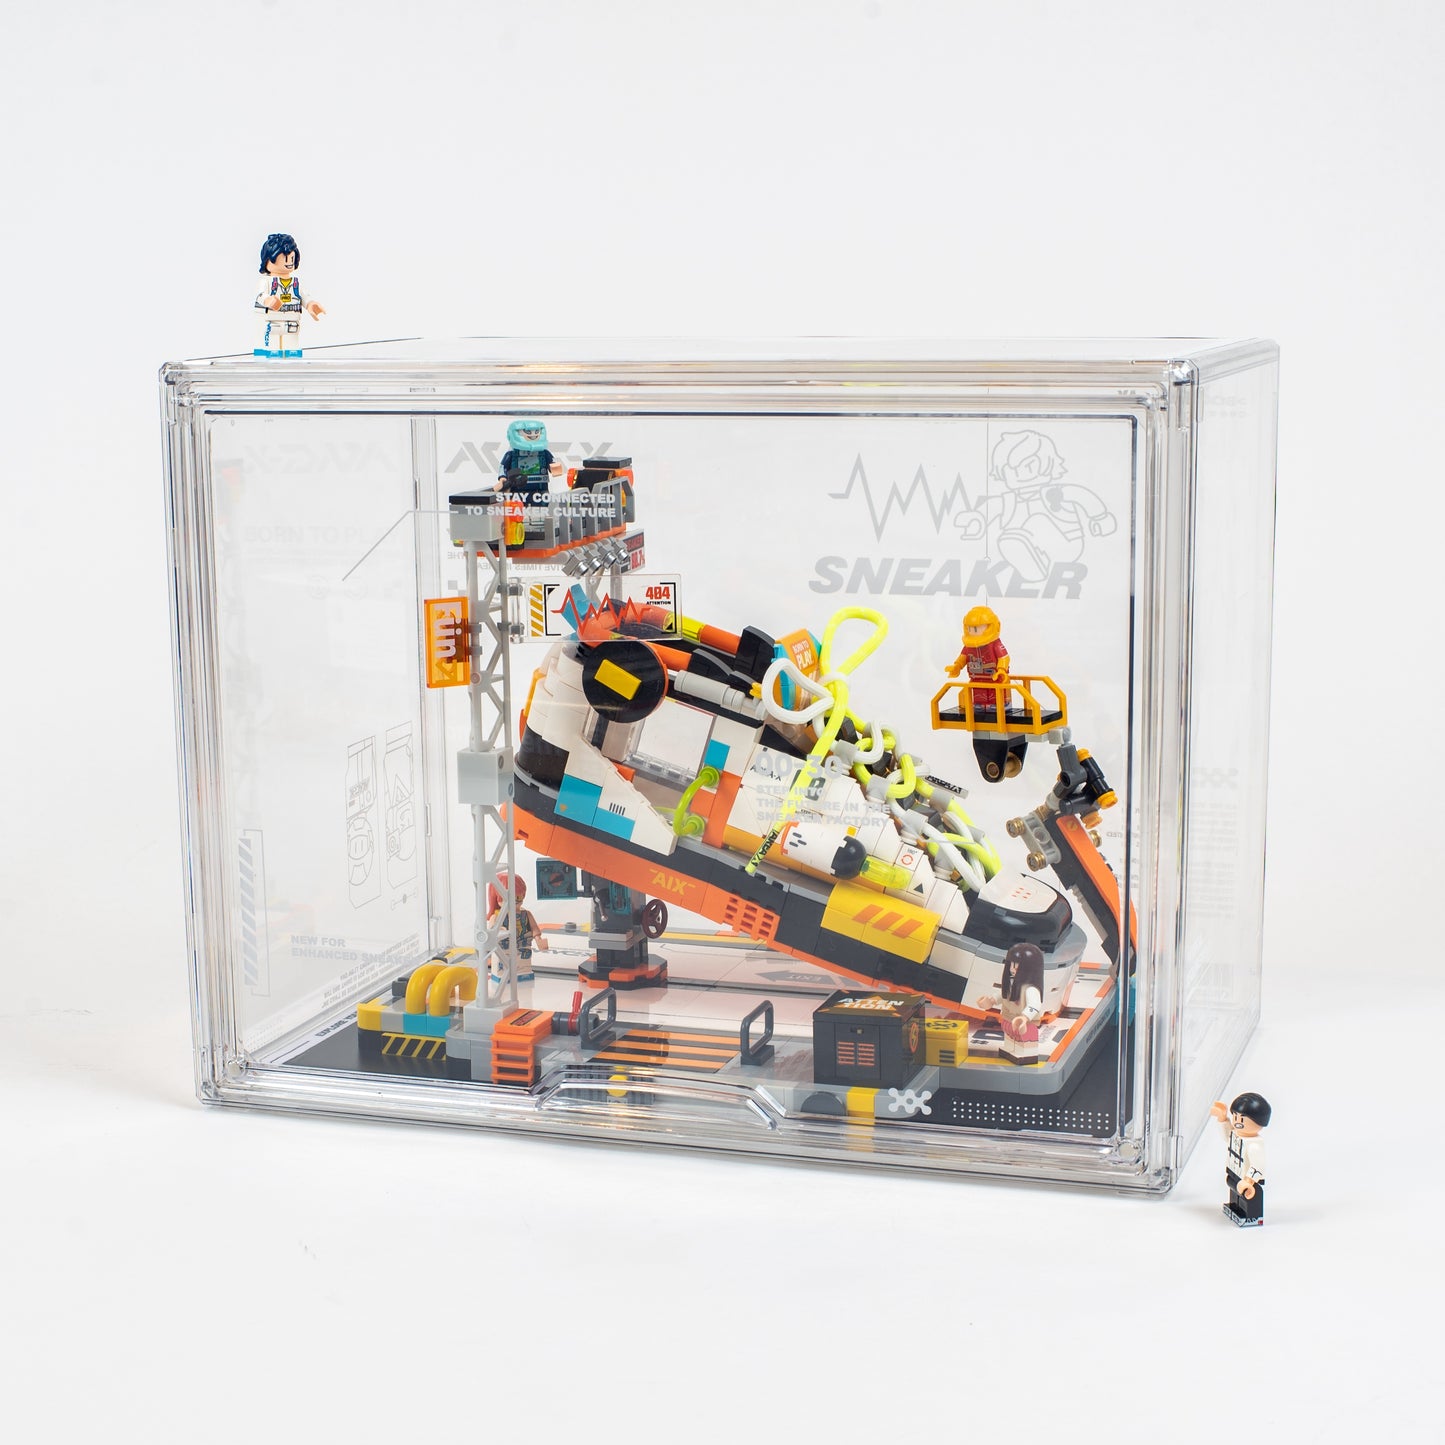 Sneaker Factory Bricks with Clear Display Case